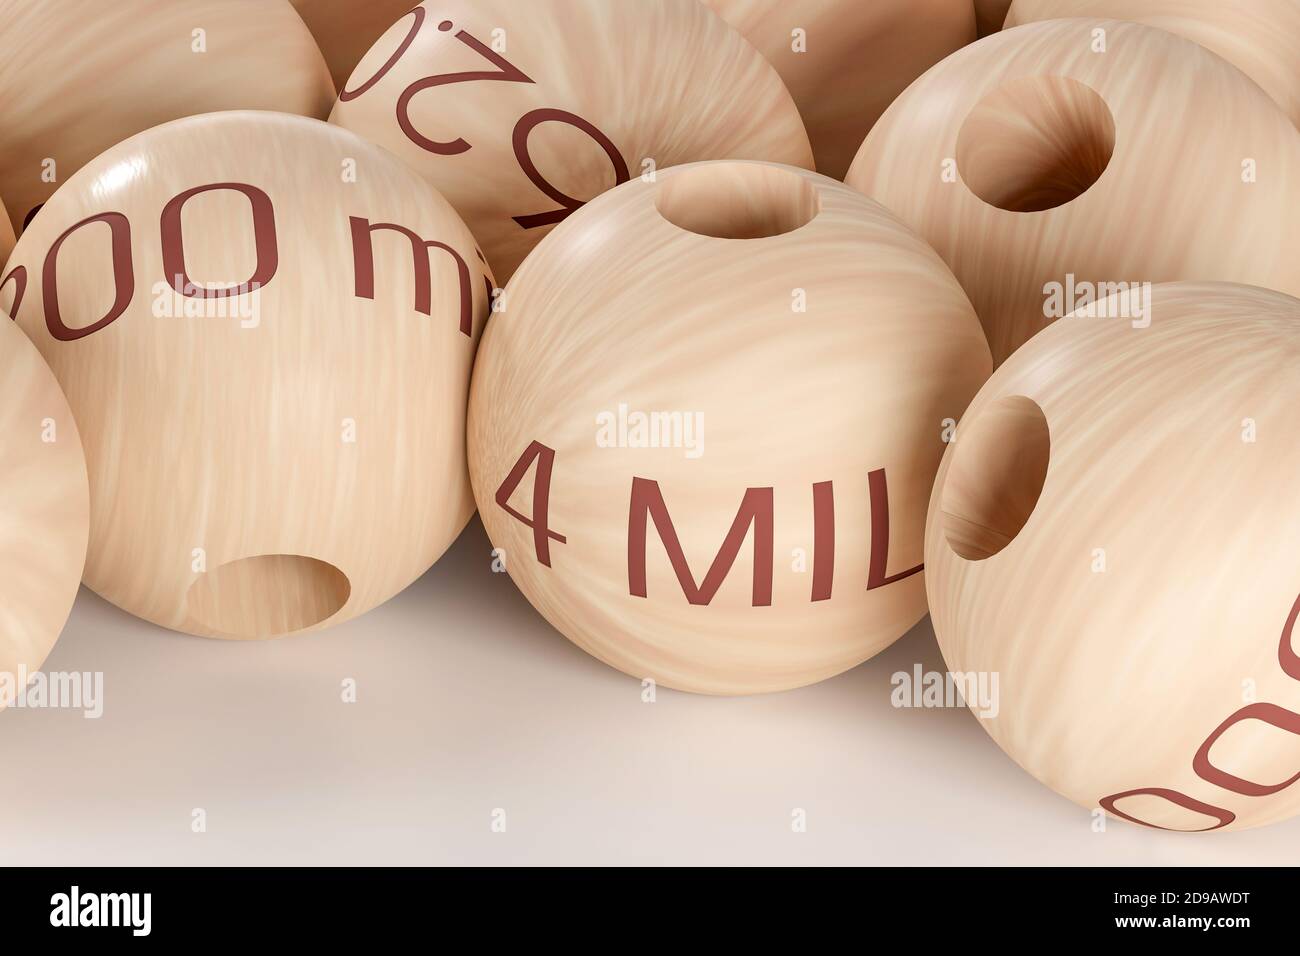 Christmas draw balls of December 22, closed view on a white background. Ilustration 3d. Stock Photo